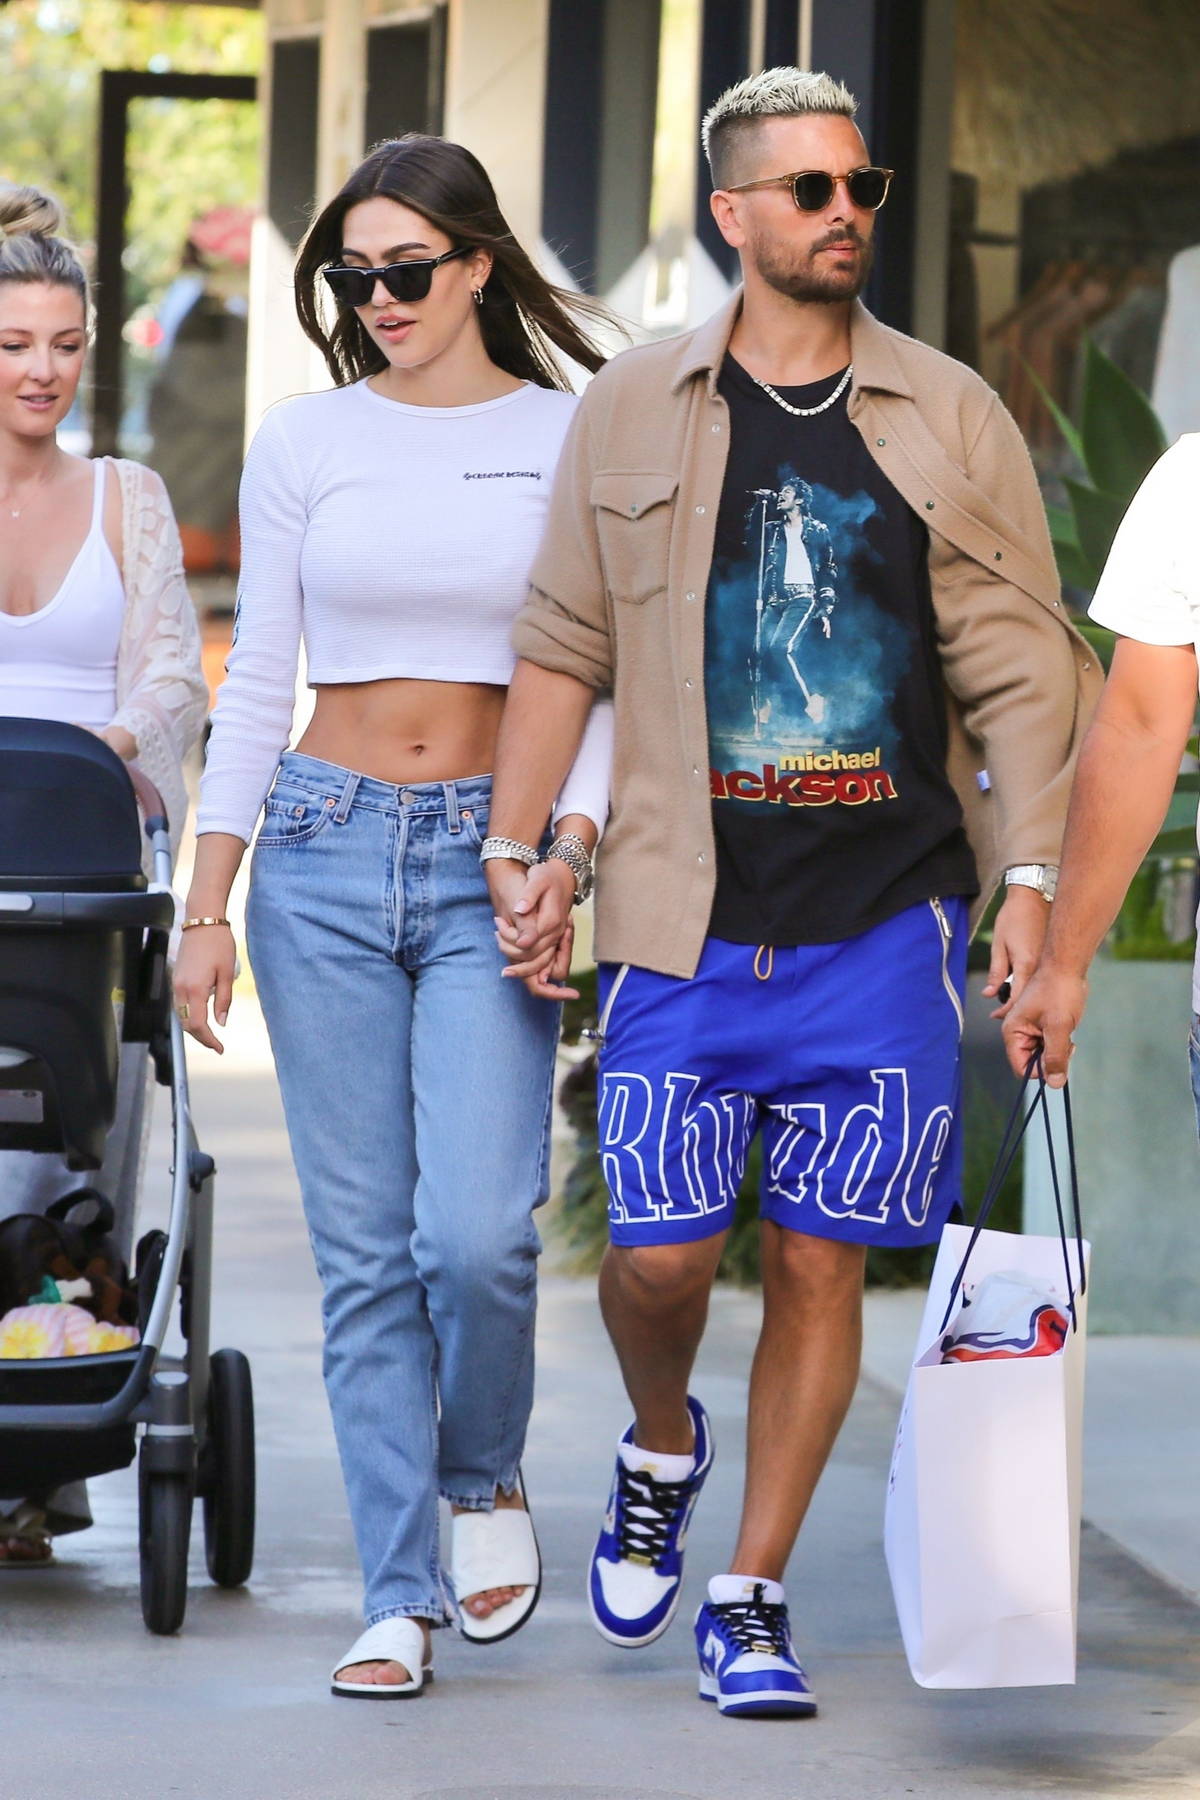 Amelia Hamlin And Scott Disick Step Out Holding Hands As They Enjoy A Day Out Shopping In Malibu